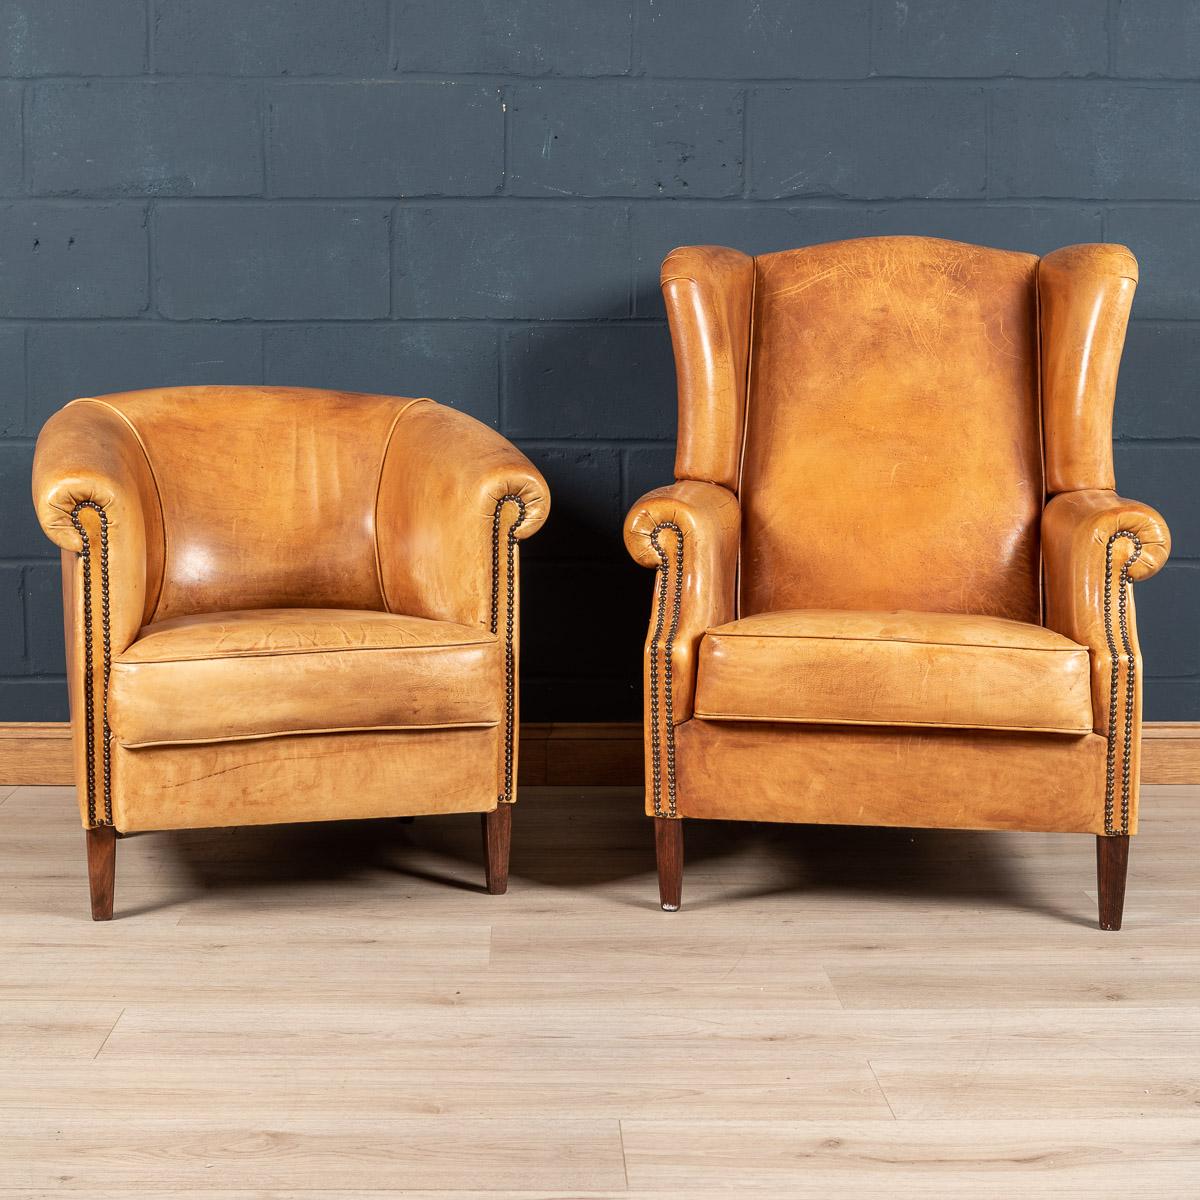 Showing superb patina and colour, this wonderful tub chair was hand upholstered sheepskin leather in Holland by the finest craftsmen. Fantastic look for any interior, both modern and traditional.

    

   

Condition:

In good condition,